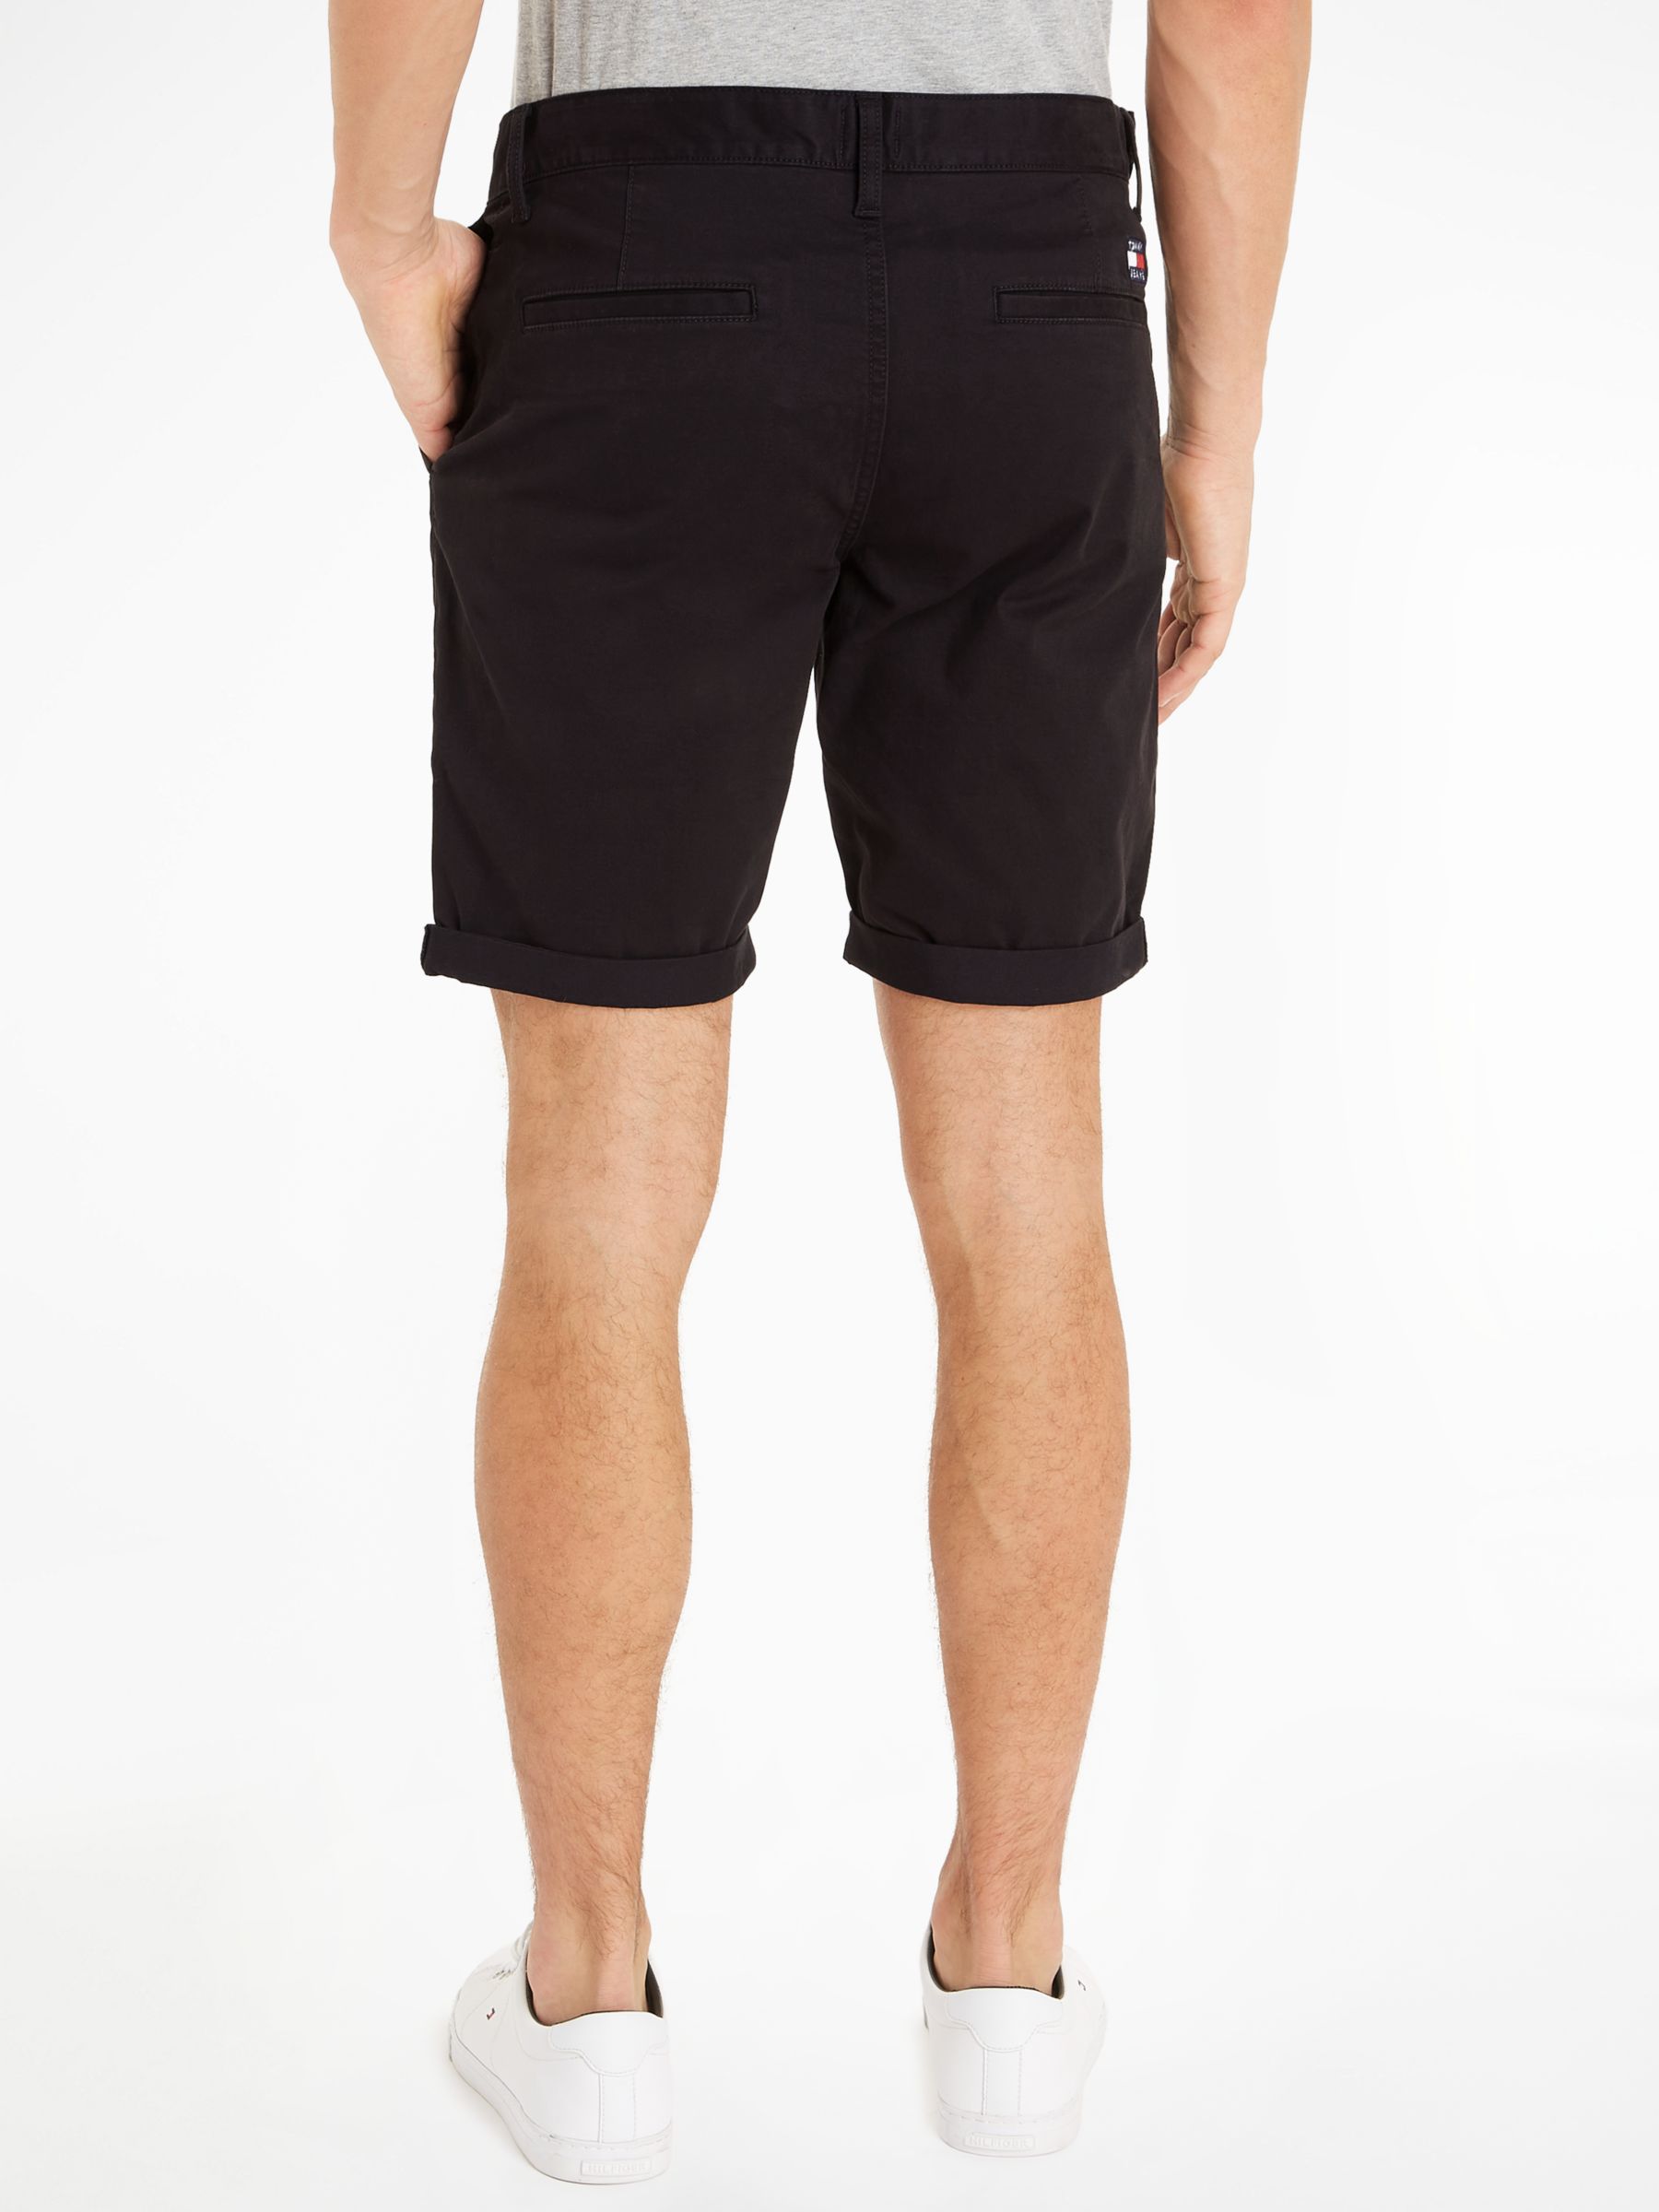 Tommy Jeans Scanton Chino Shorts, Black, 30R